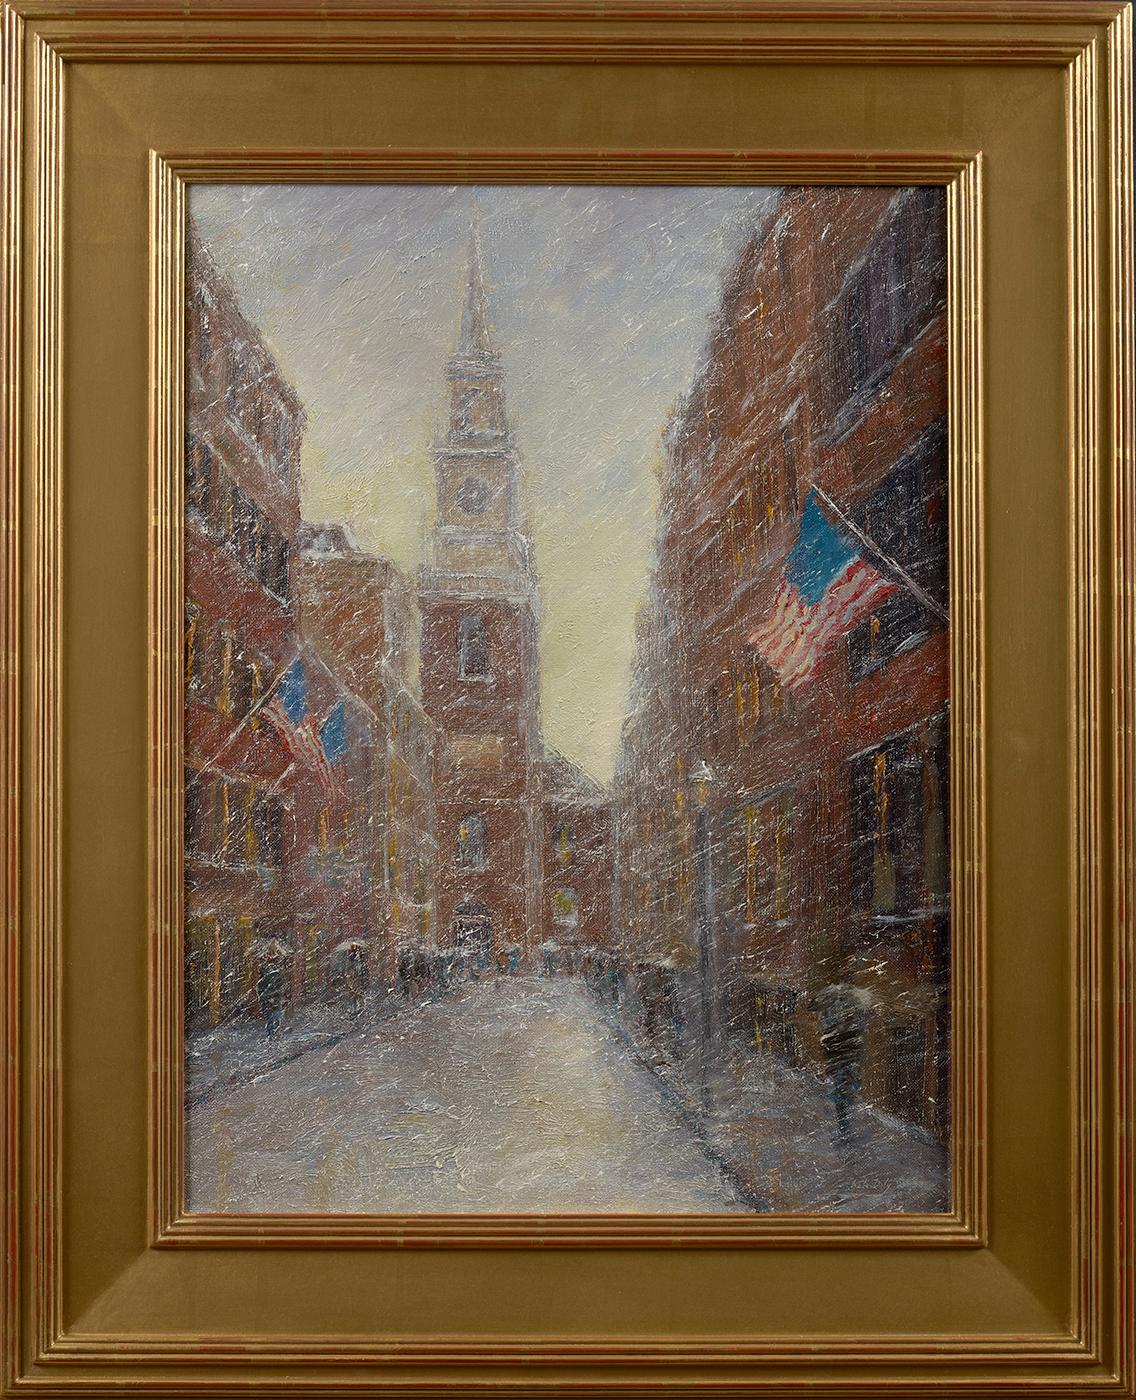 President's Day, Old North Church (Boston, MA) - Painting by Mark Daly